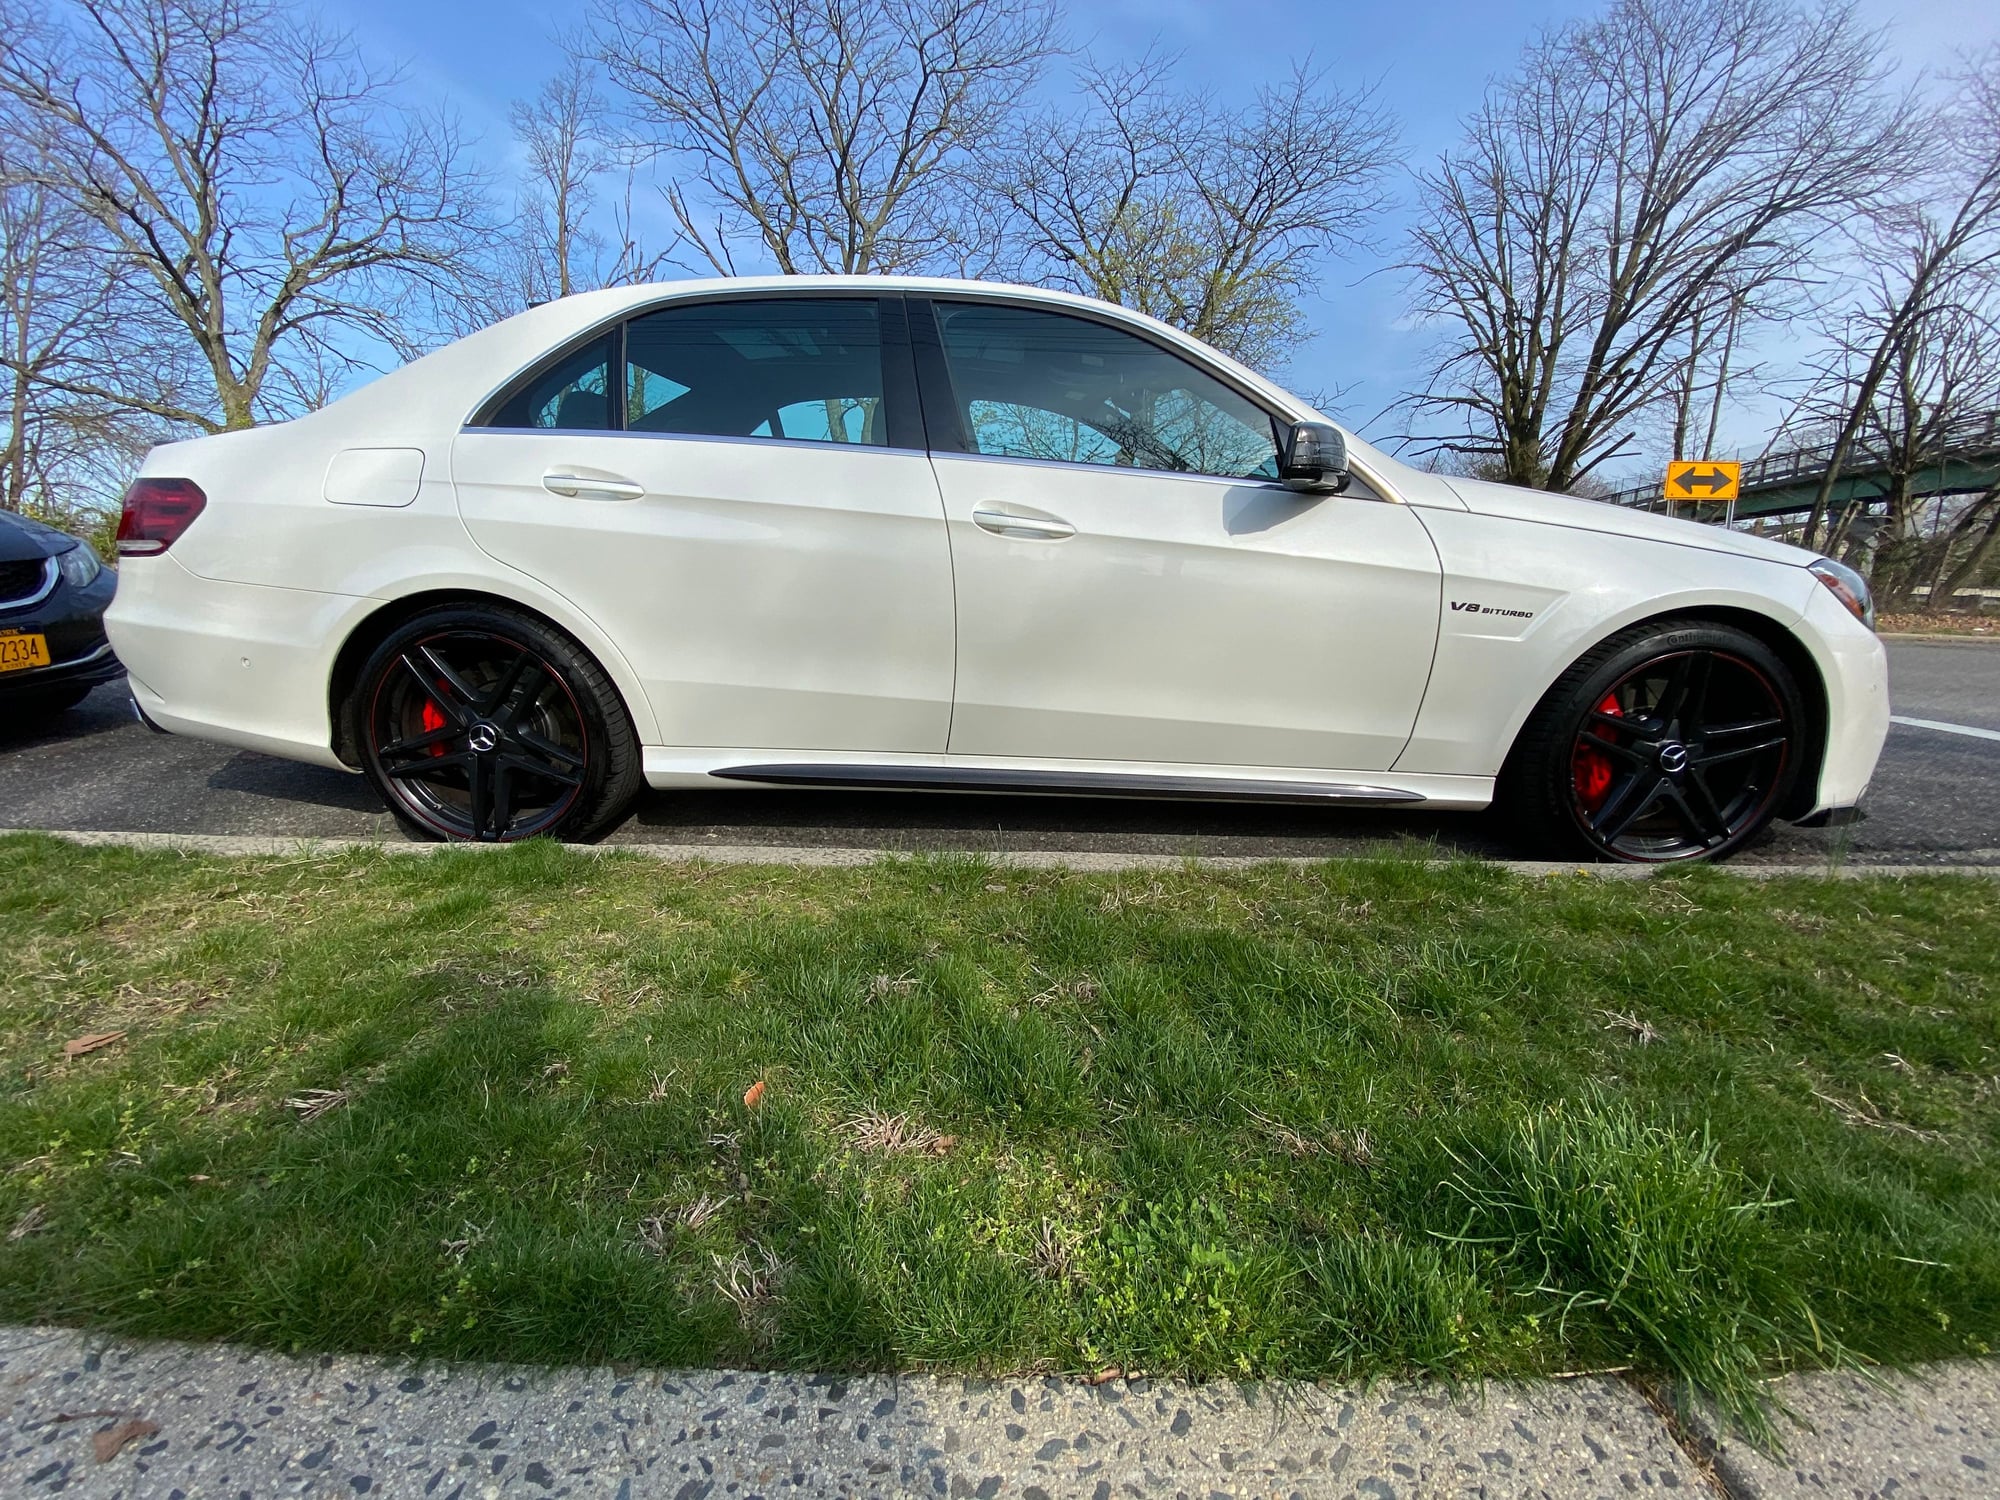 2014 Mercedes-Benz E63 AMG S - 2014 E63s Diamond White w/factory CF package. Dealer maintained and daily driven - Used - VIN WDDHF7GB2EA997897 - 58,000 Miles - 8 cyl - AWD - Automatic - Sedan - White - Babylon, NY 11702, United States